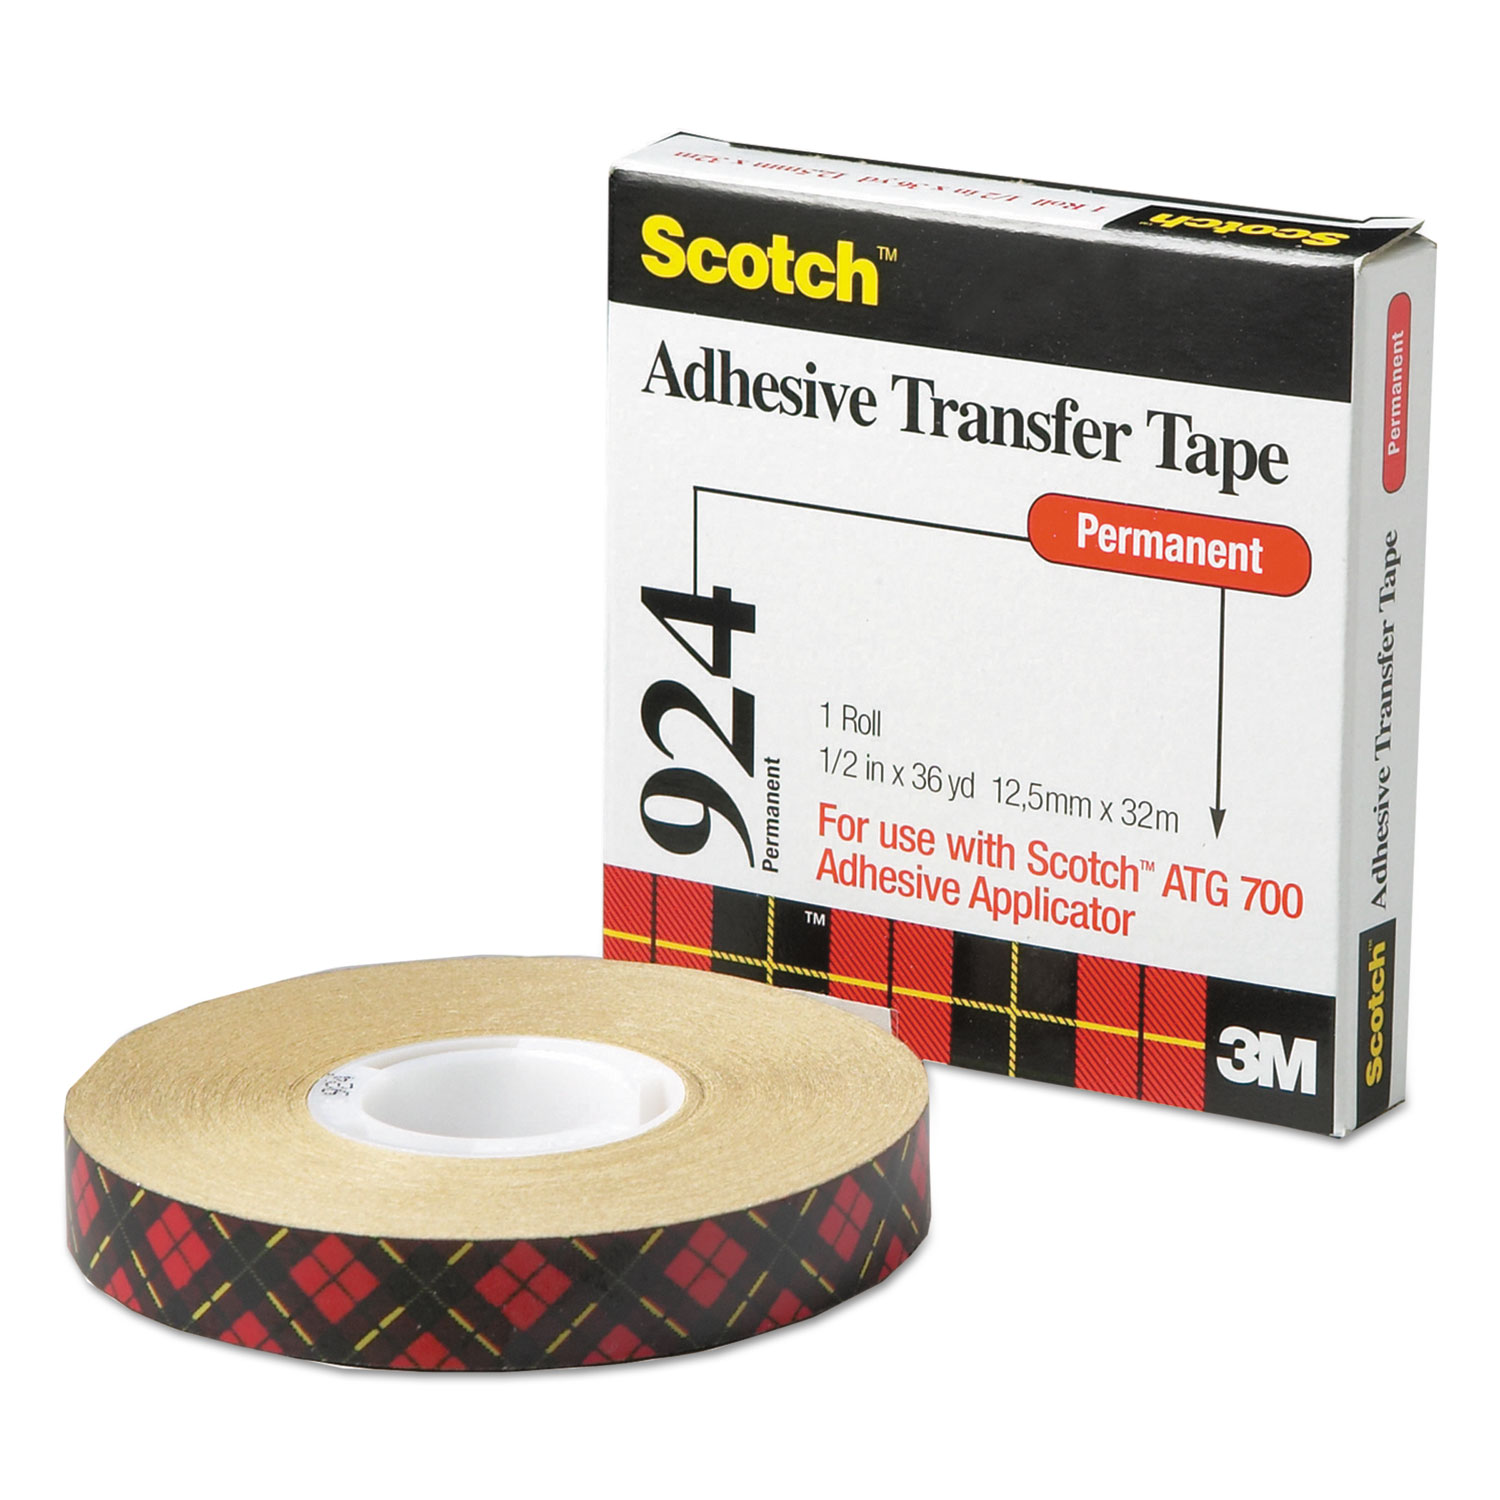 Adhesive Transfer Tape, 1/2 Wide x 36yds